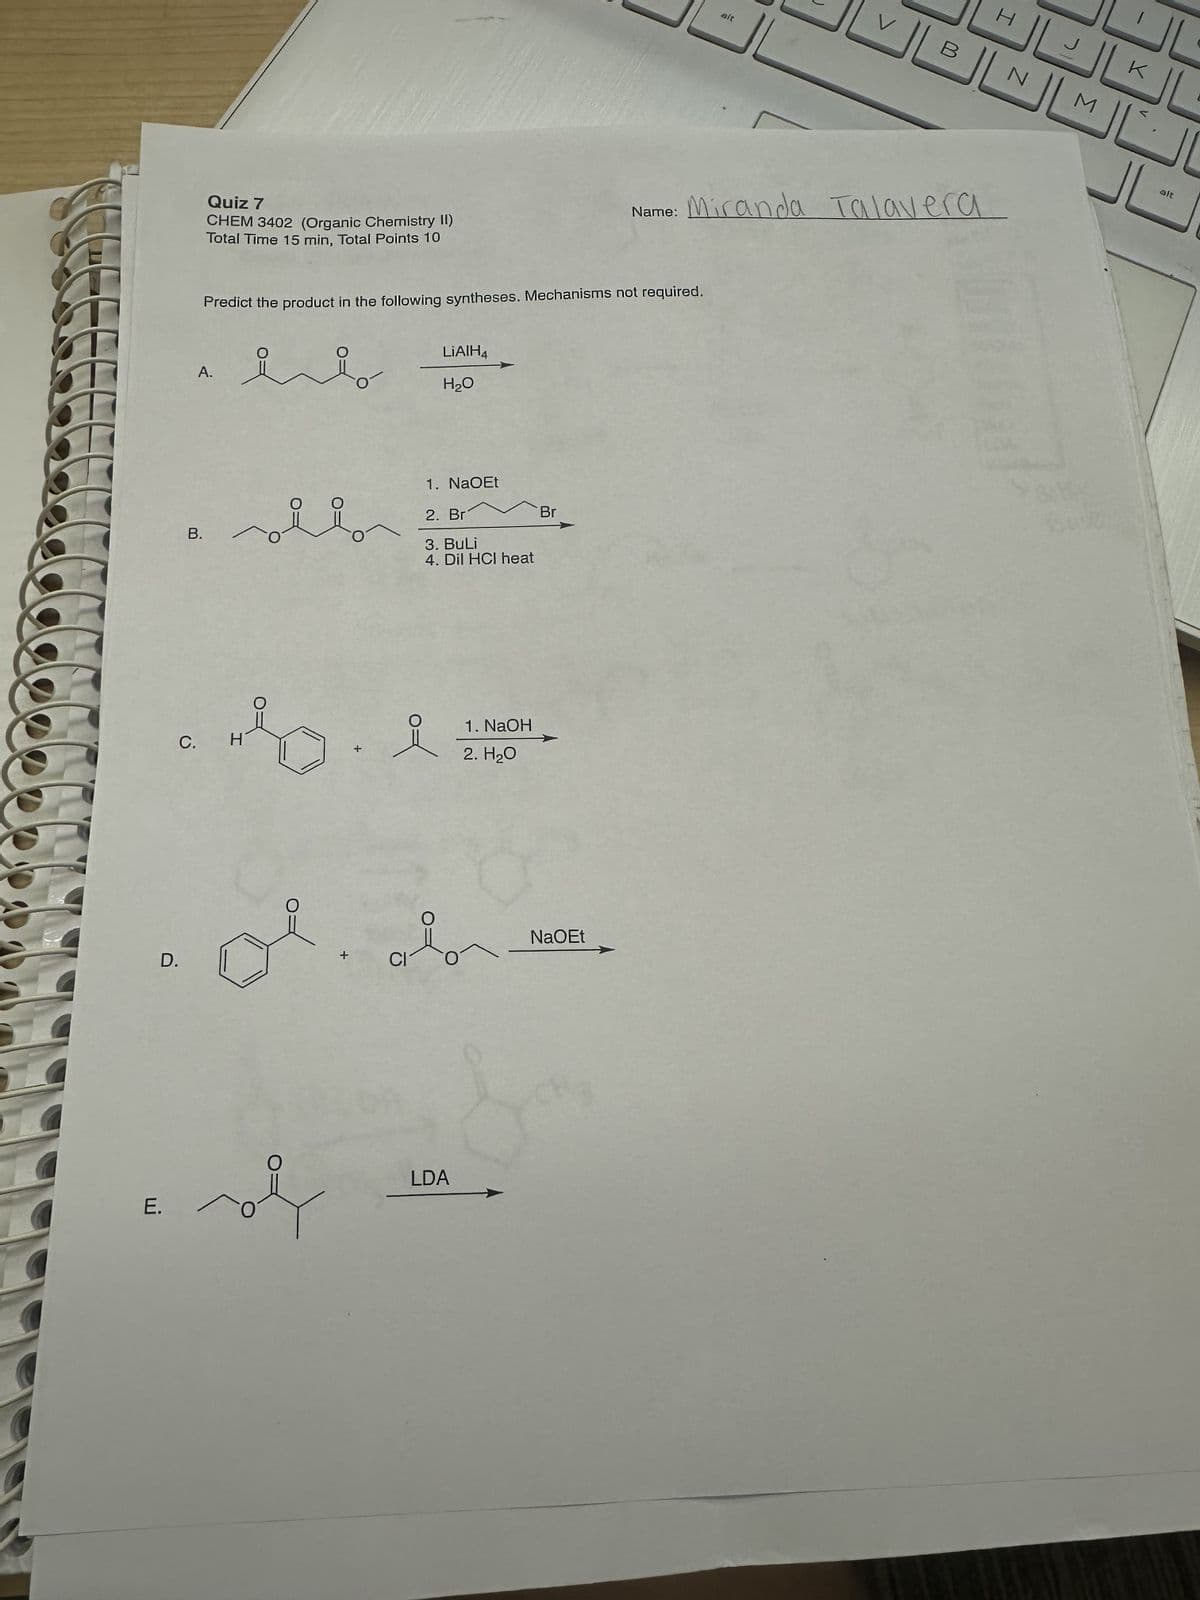 Quiz 7
CHEM 3402 (Organic Chemistry II)
Total Time 15 min, Total Points 10
alt
H
V
B
N
M
Name:
Miranda Talavera
Predict the product in the following syntheses. Mechanisms not required.
A.
요
LiAlH4
H₂O
B.
1. NaOEt
2. Br
3. BuLi
4. Dil HCI heat
Br
C.
H
+
요
1. NaOH
2. H₂O
D.
CI
O
NaOEt
E.
O
LDA
K
alt